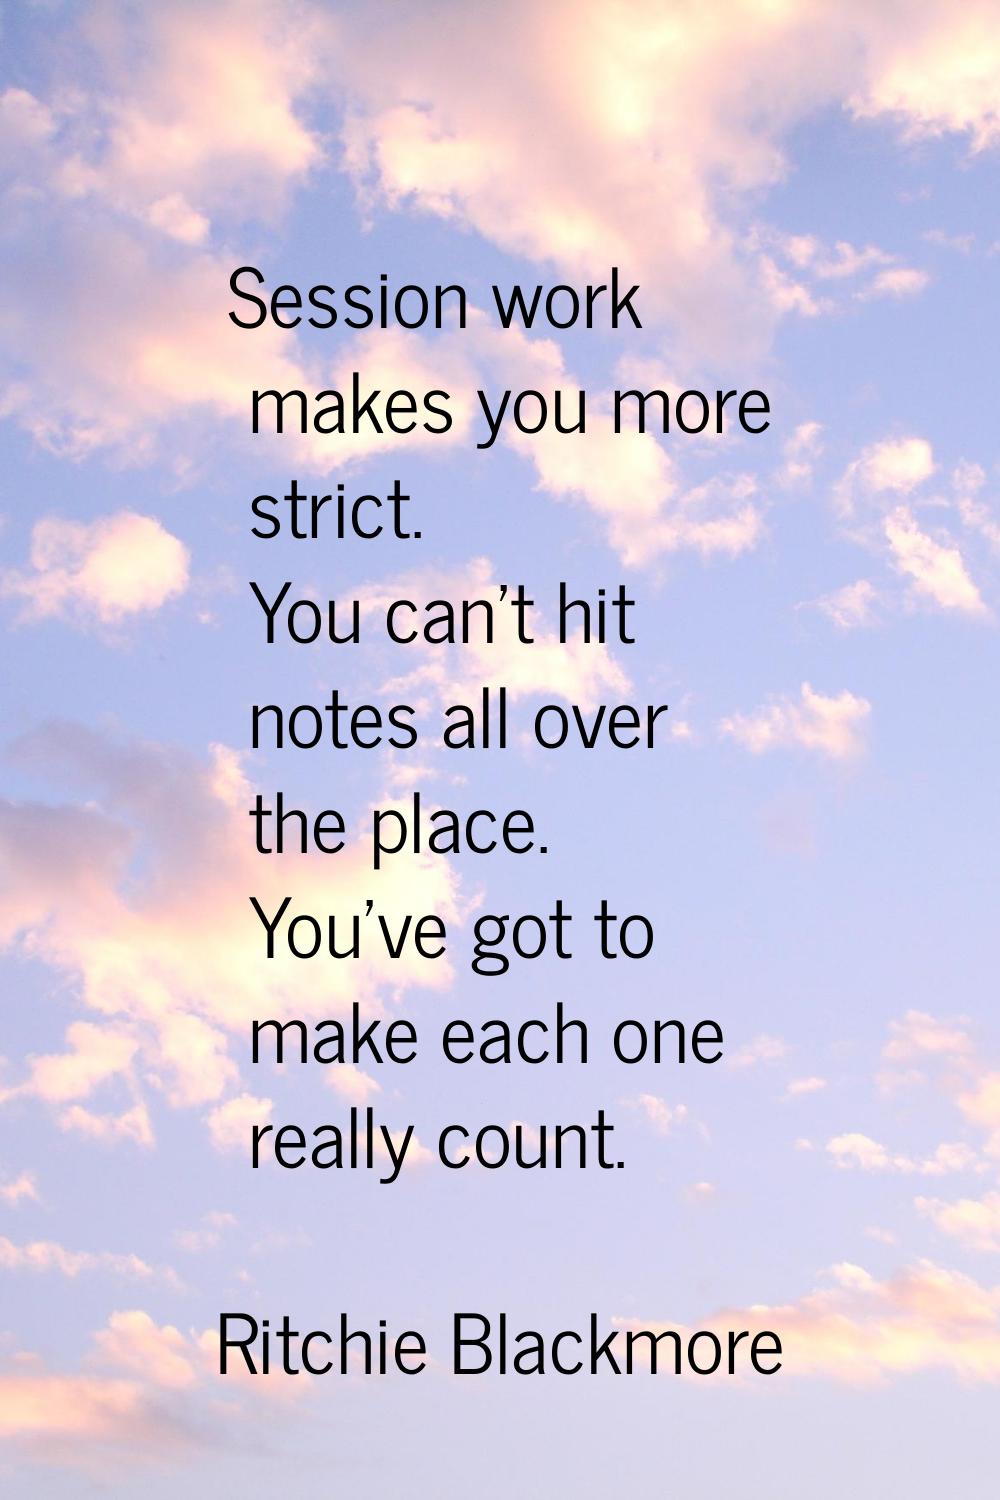 Session work makes you more strict. You can't hit notes all over the place. You've got to make each